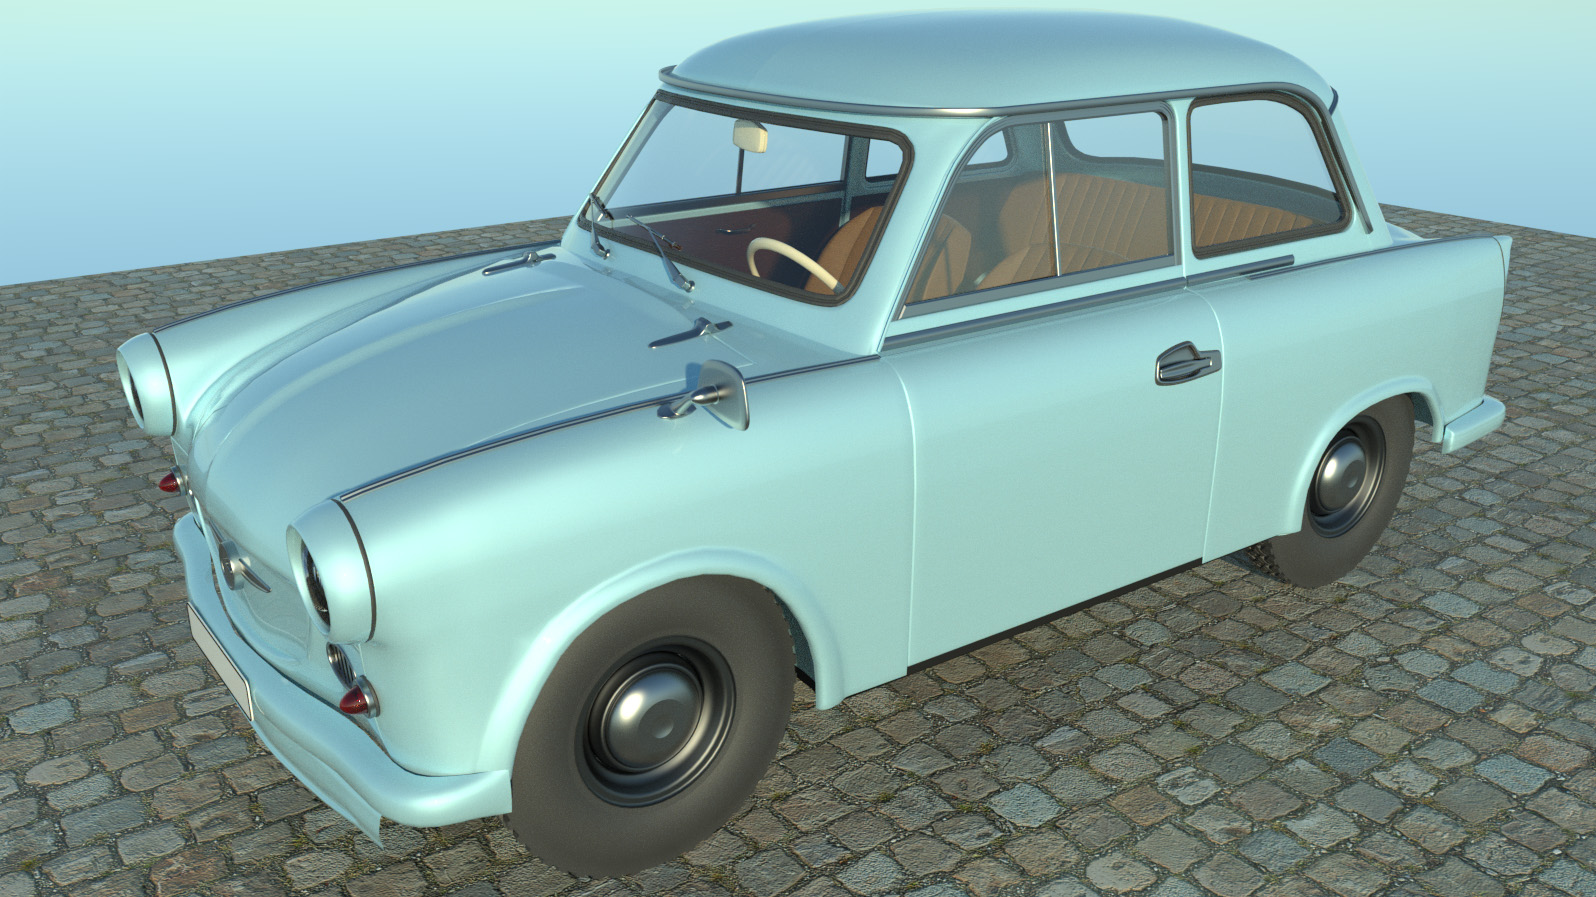 Trabant 500 from the early 1960s from East Germany.